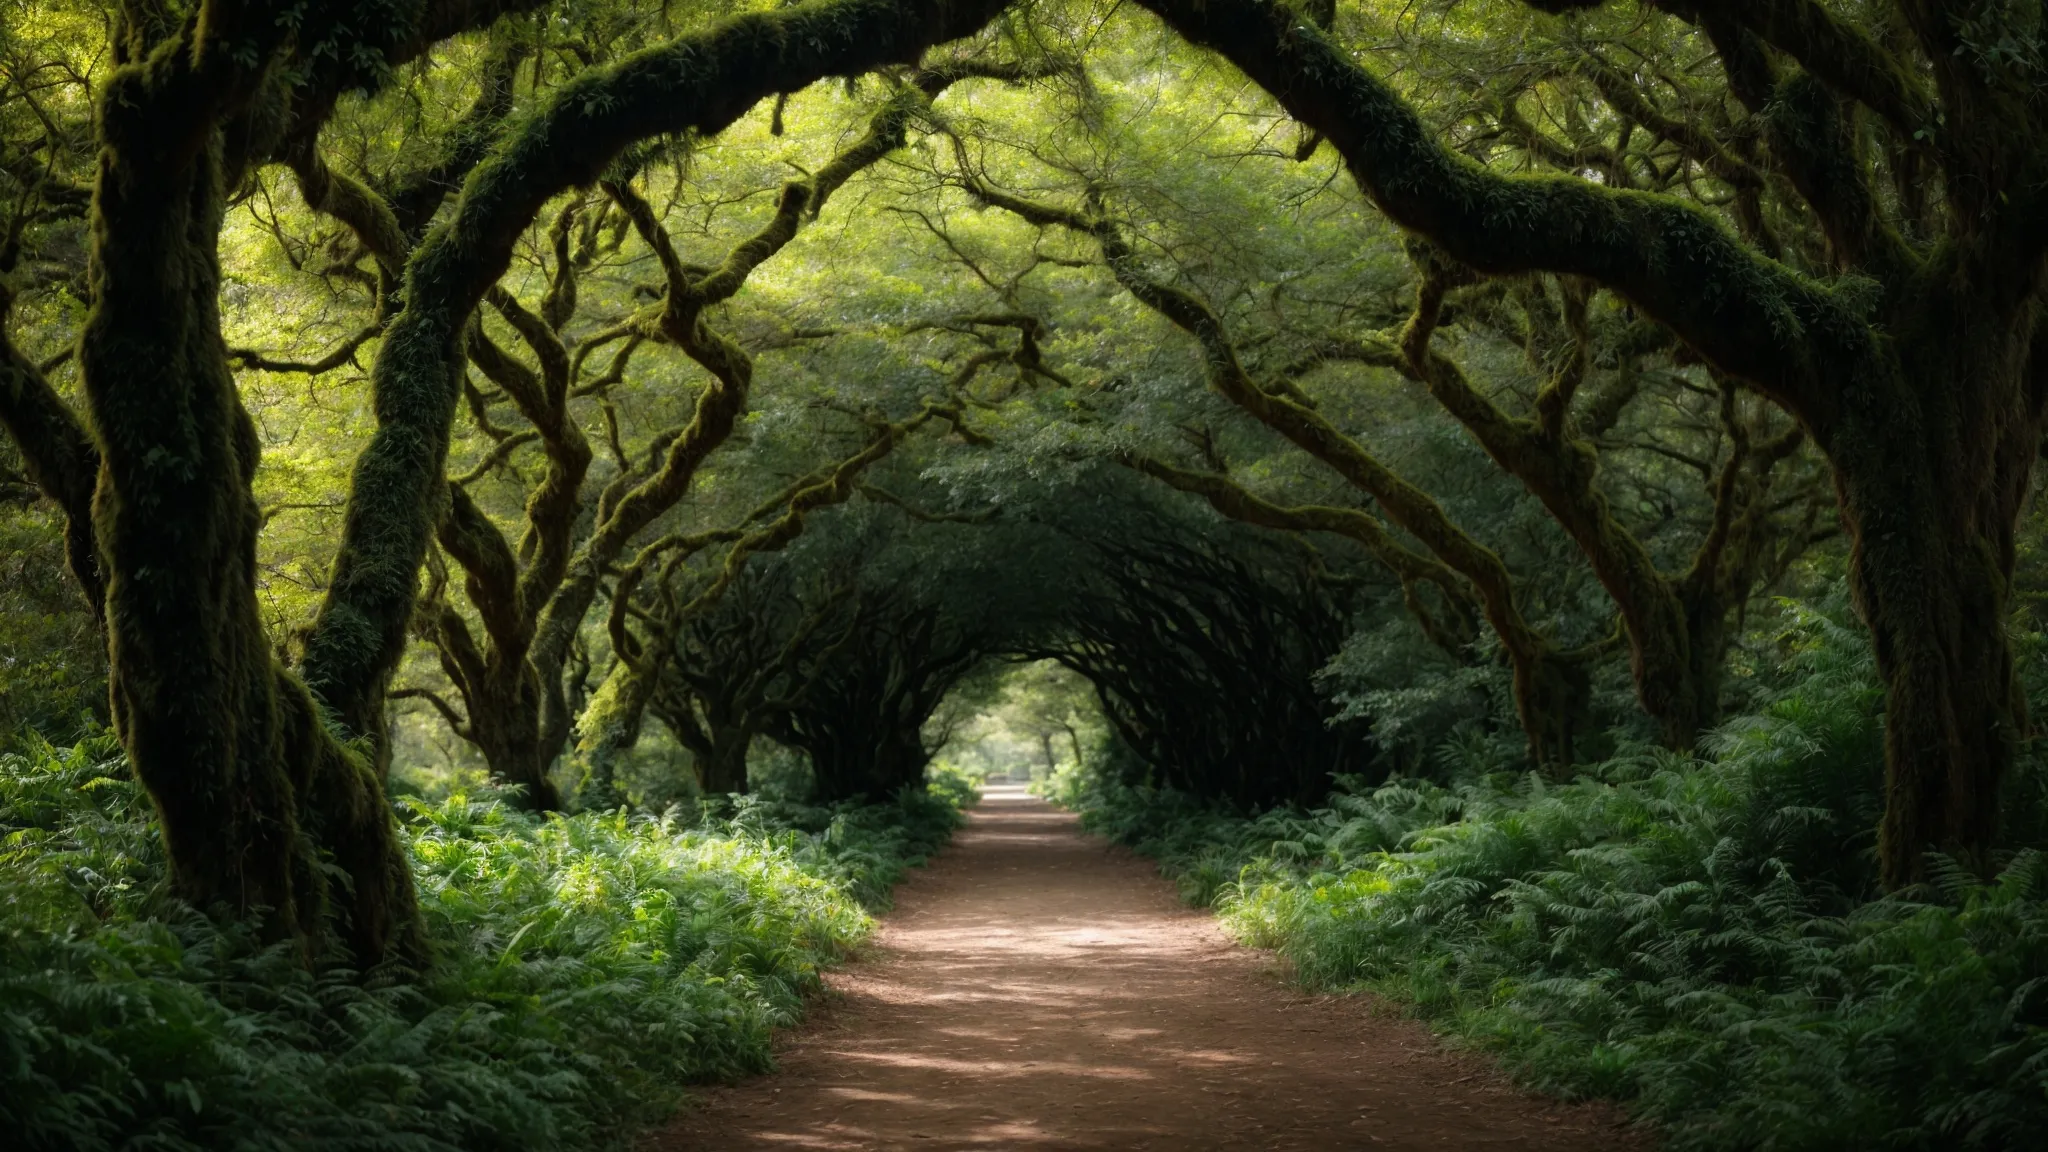 a serene image of a lush path in a forest, leading the eye through a natural archway of intertwining tree branches.